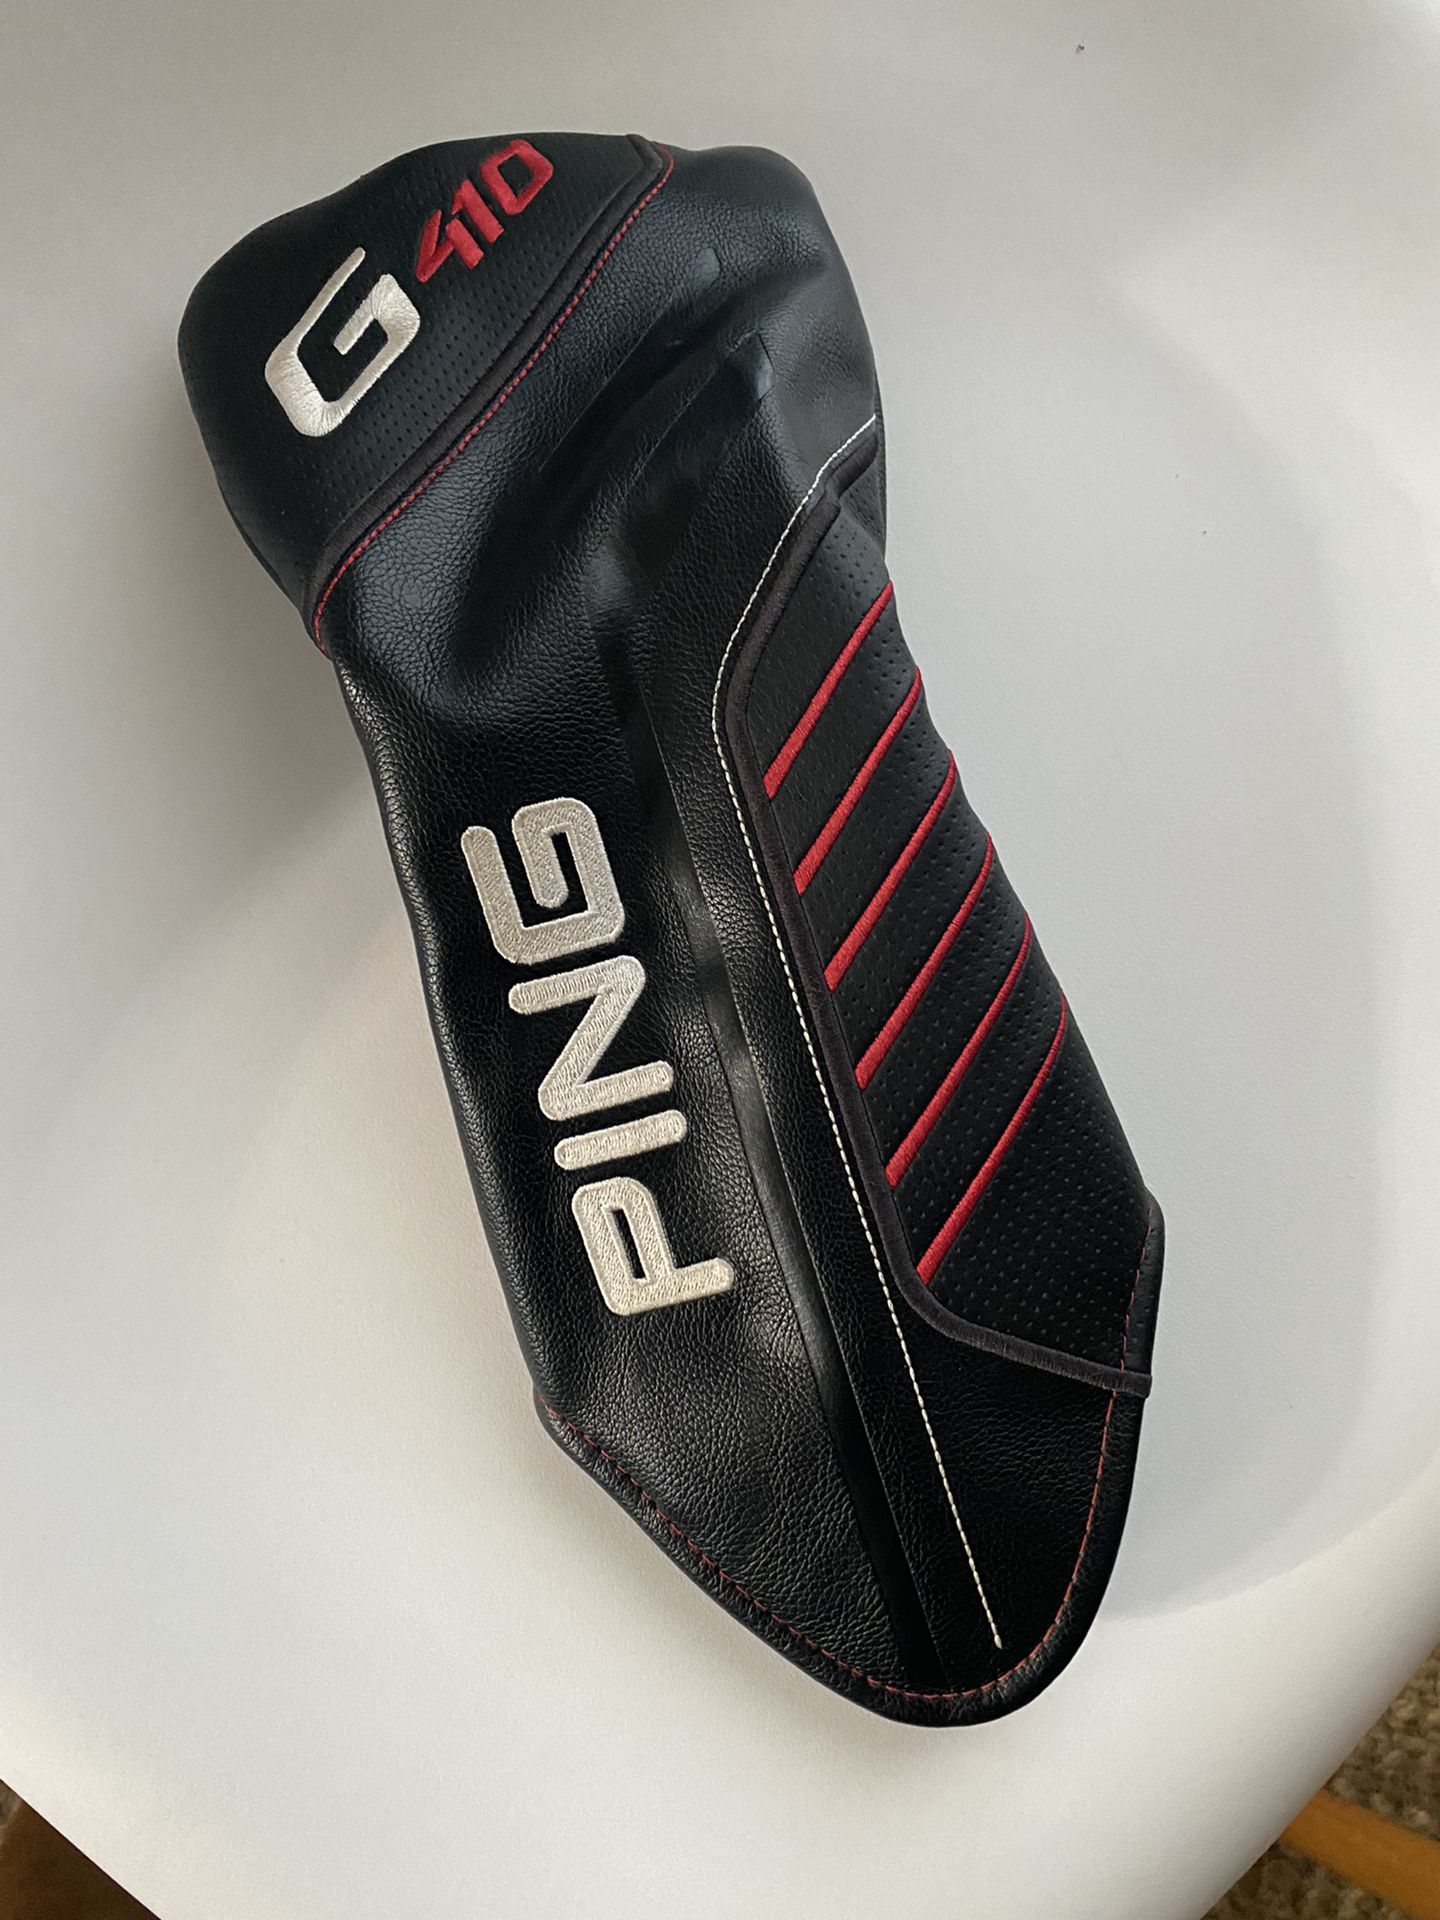 Ping G410 Driver Headcover